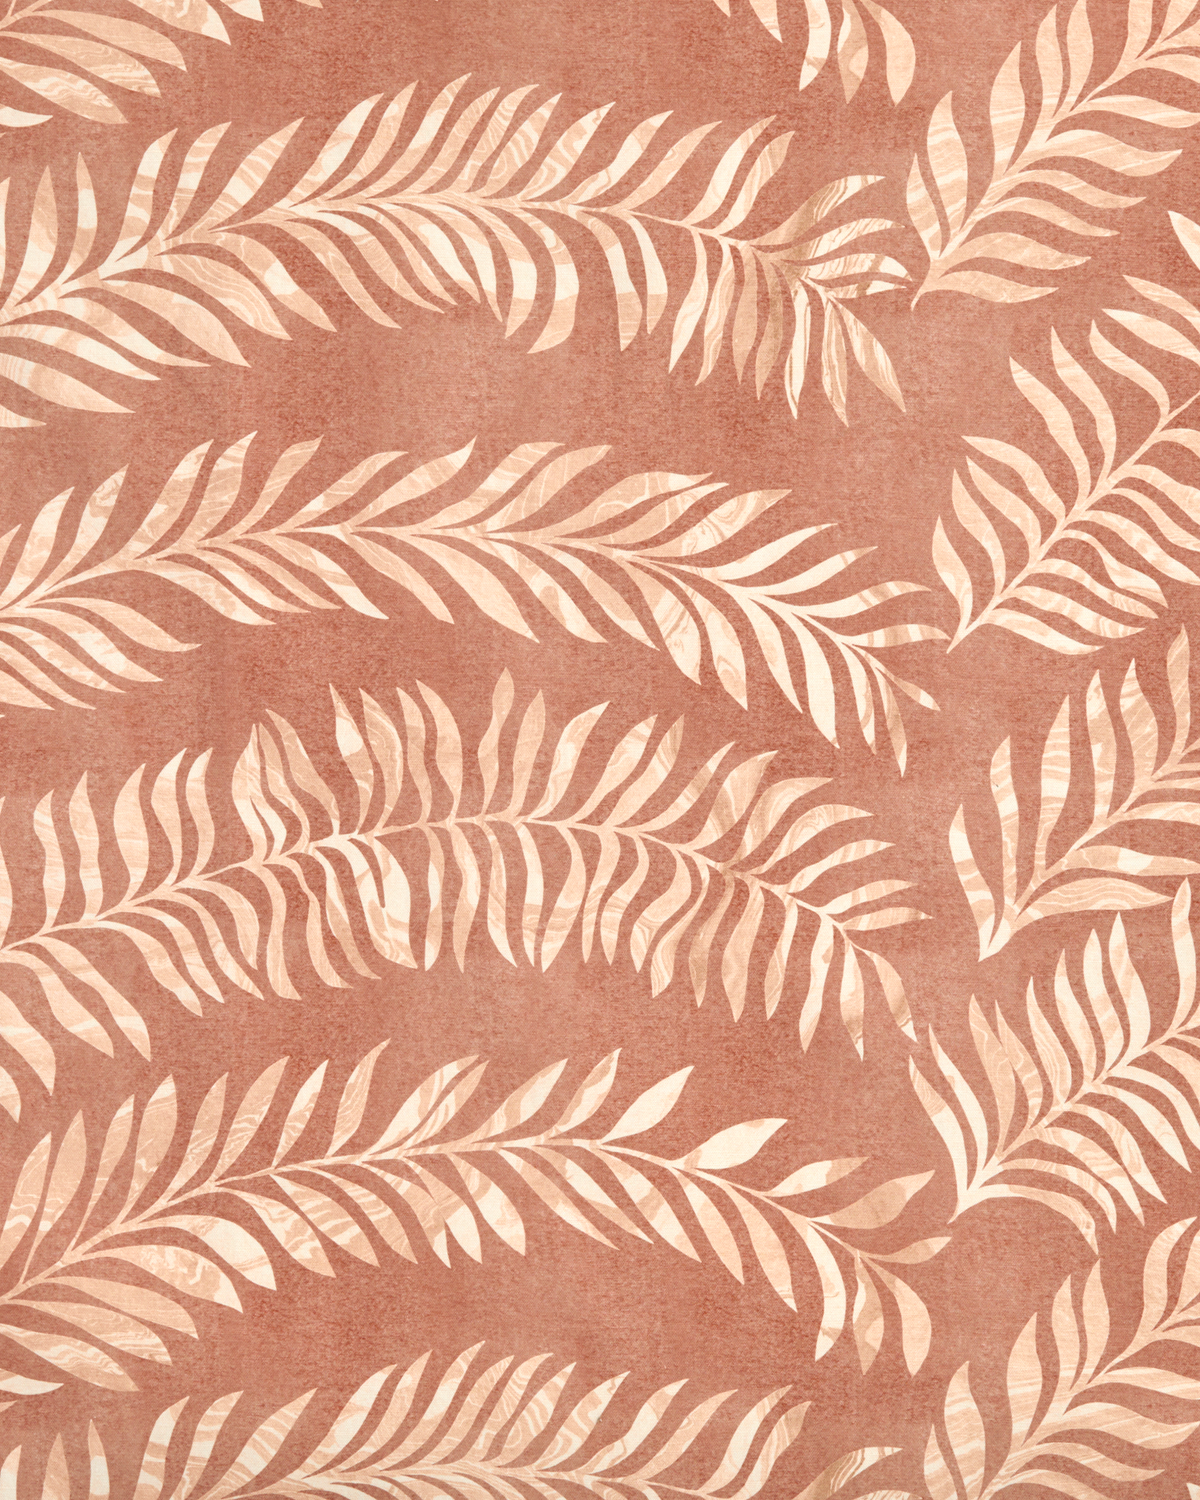 Marble Fern Fabric in Canyon